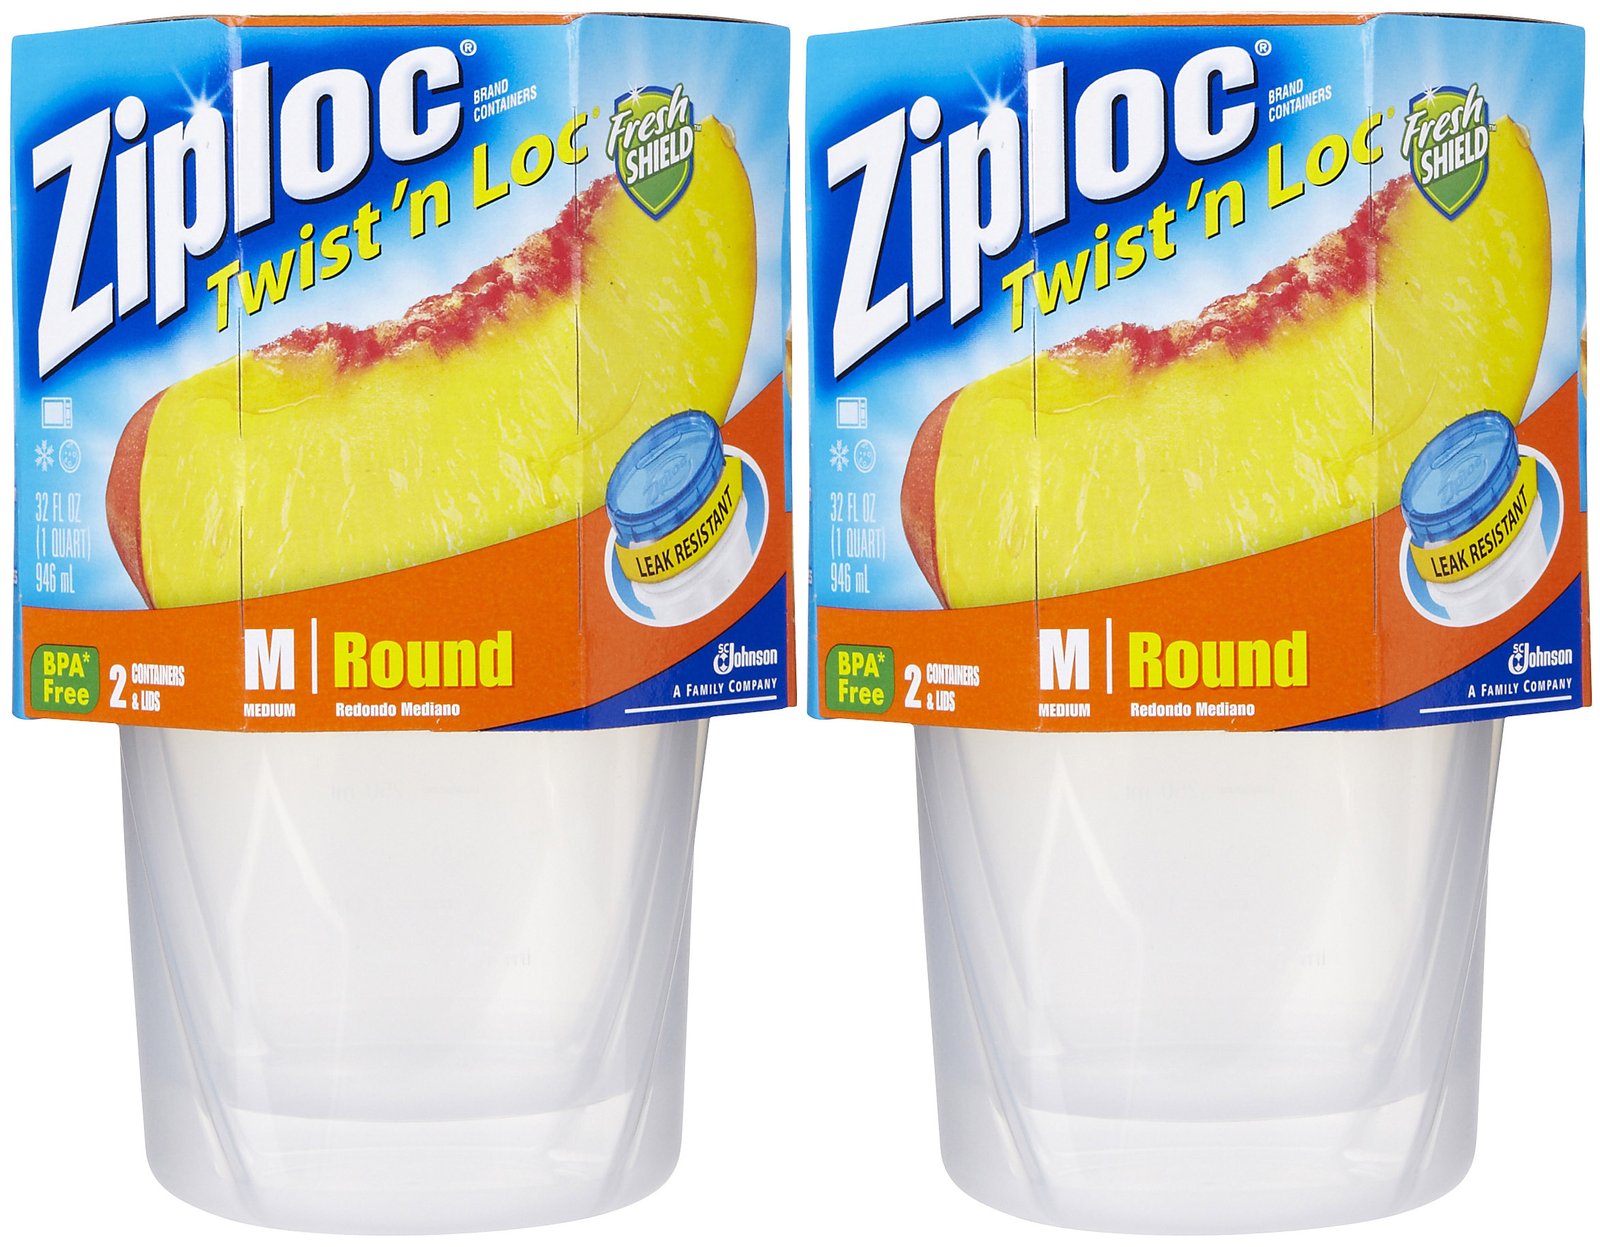 Ziploc Twist’n Loc Storage Containers Only $0.96 at Target